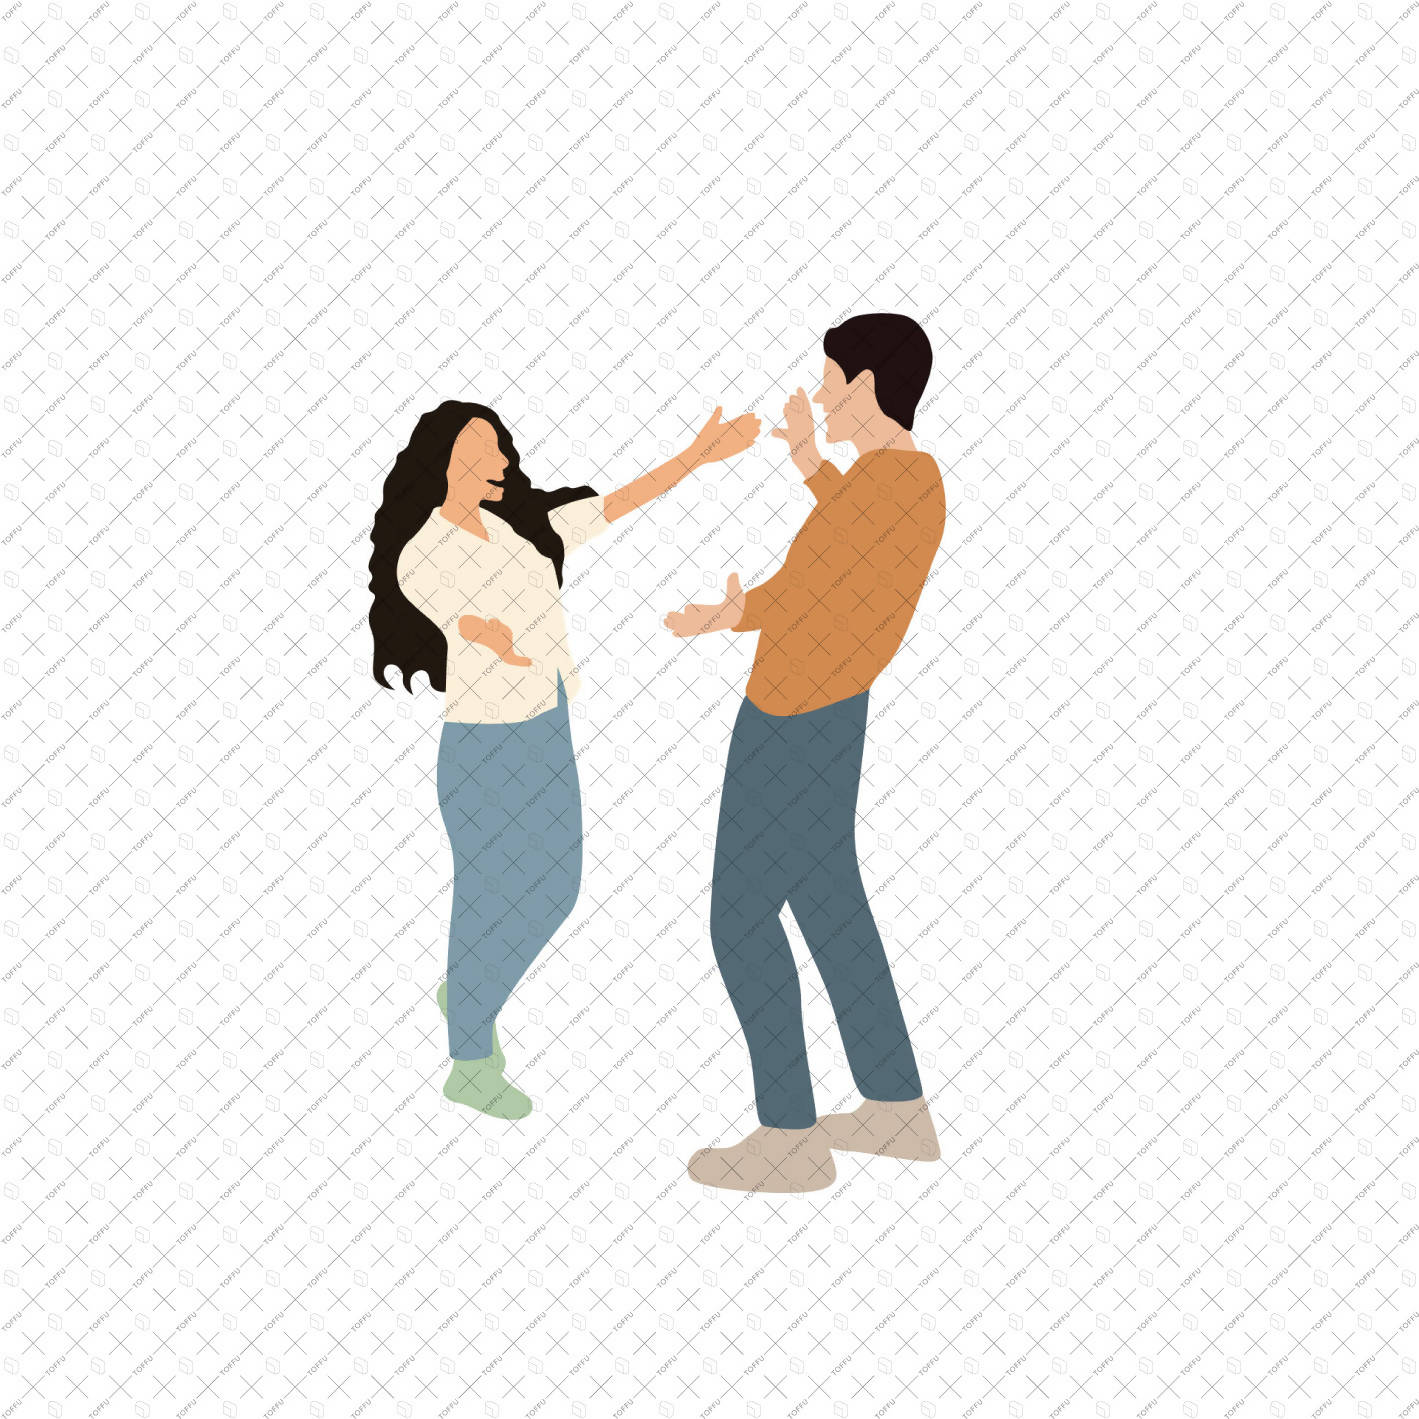 Flat Vector Social Interactions People PNG - Toffu Co